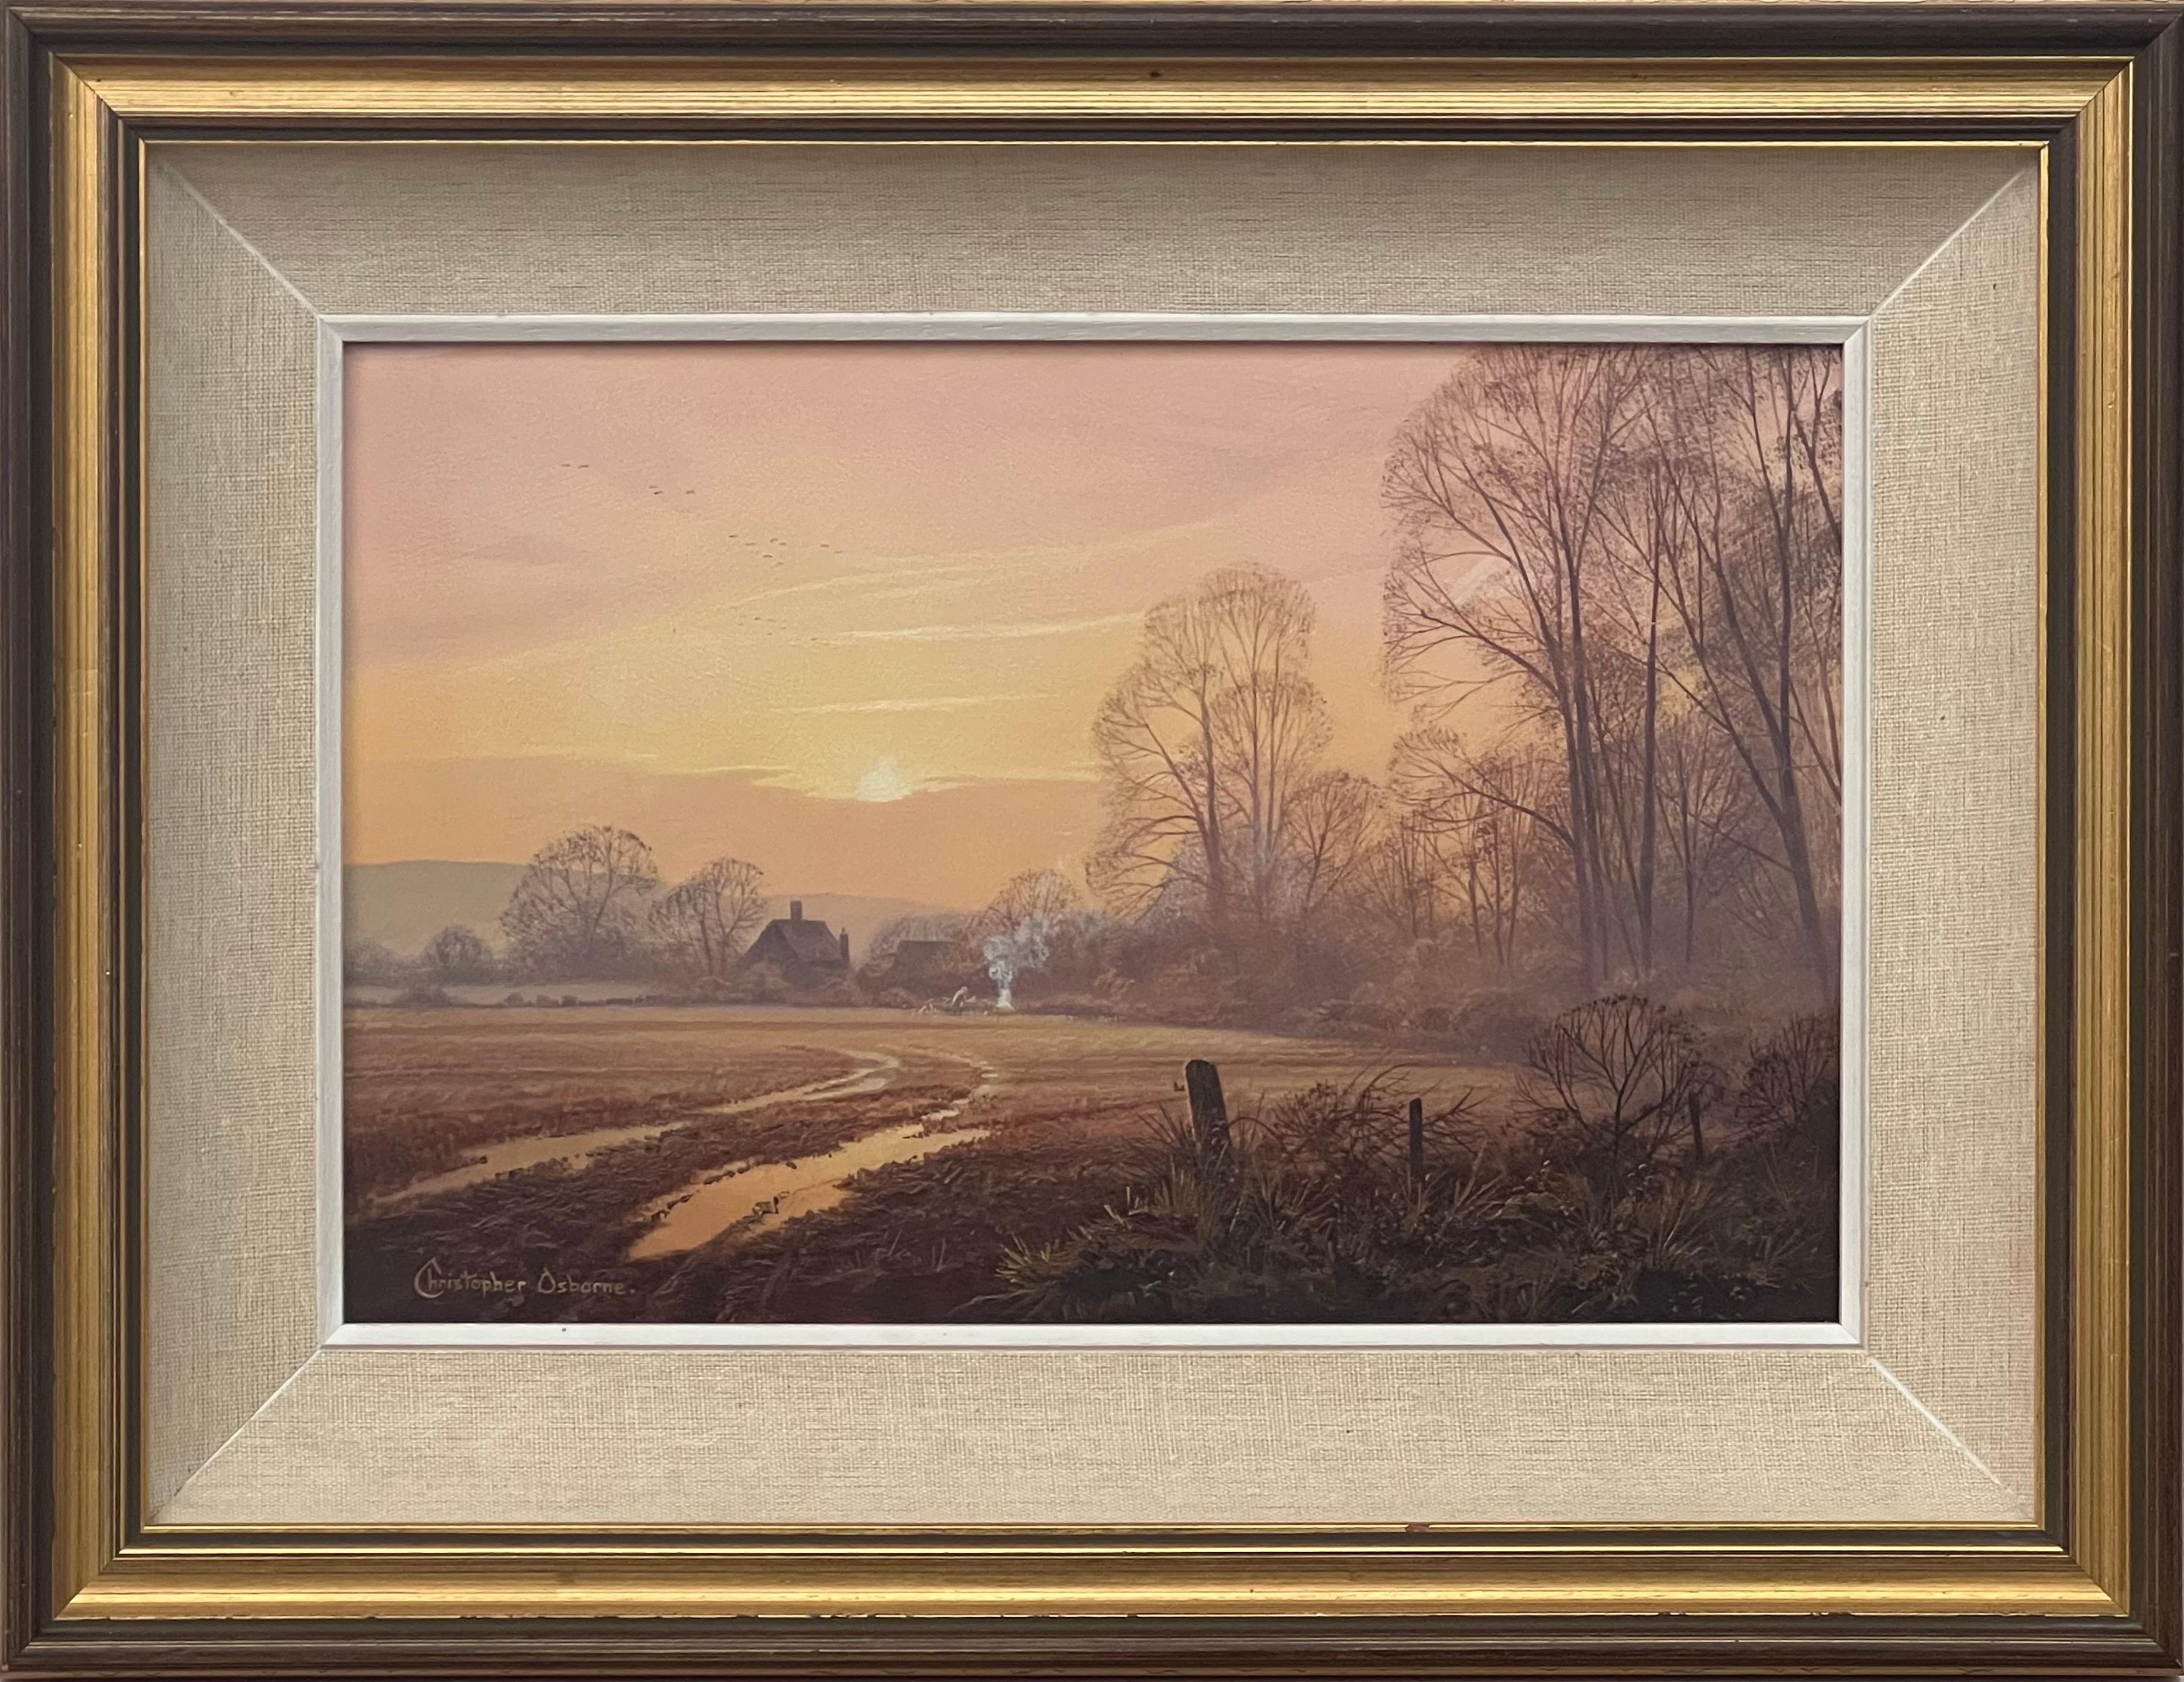 Christopher Osborne Figurative Painting - Farm in the Woods at Sunset in the English Countryside with Warm Brown Colours